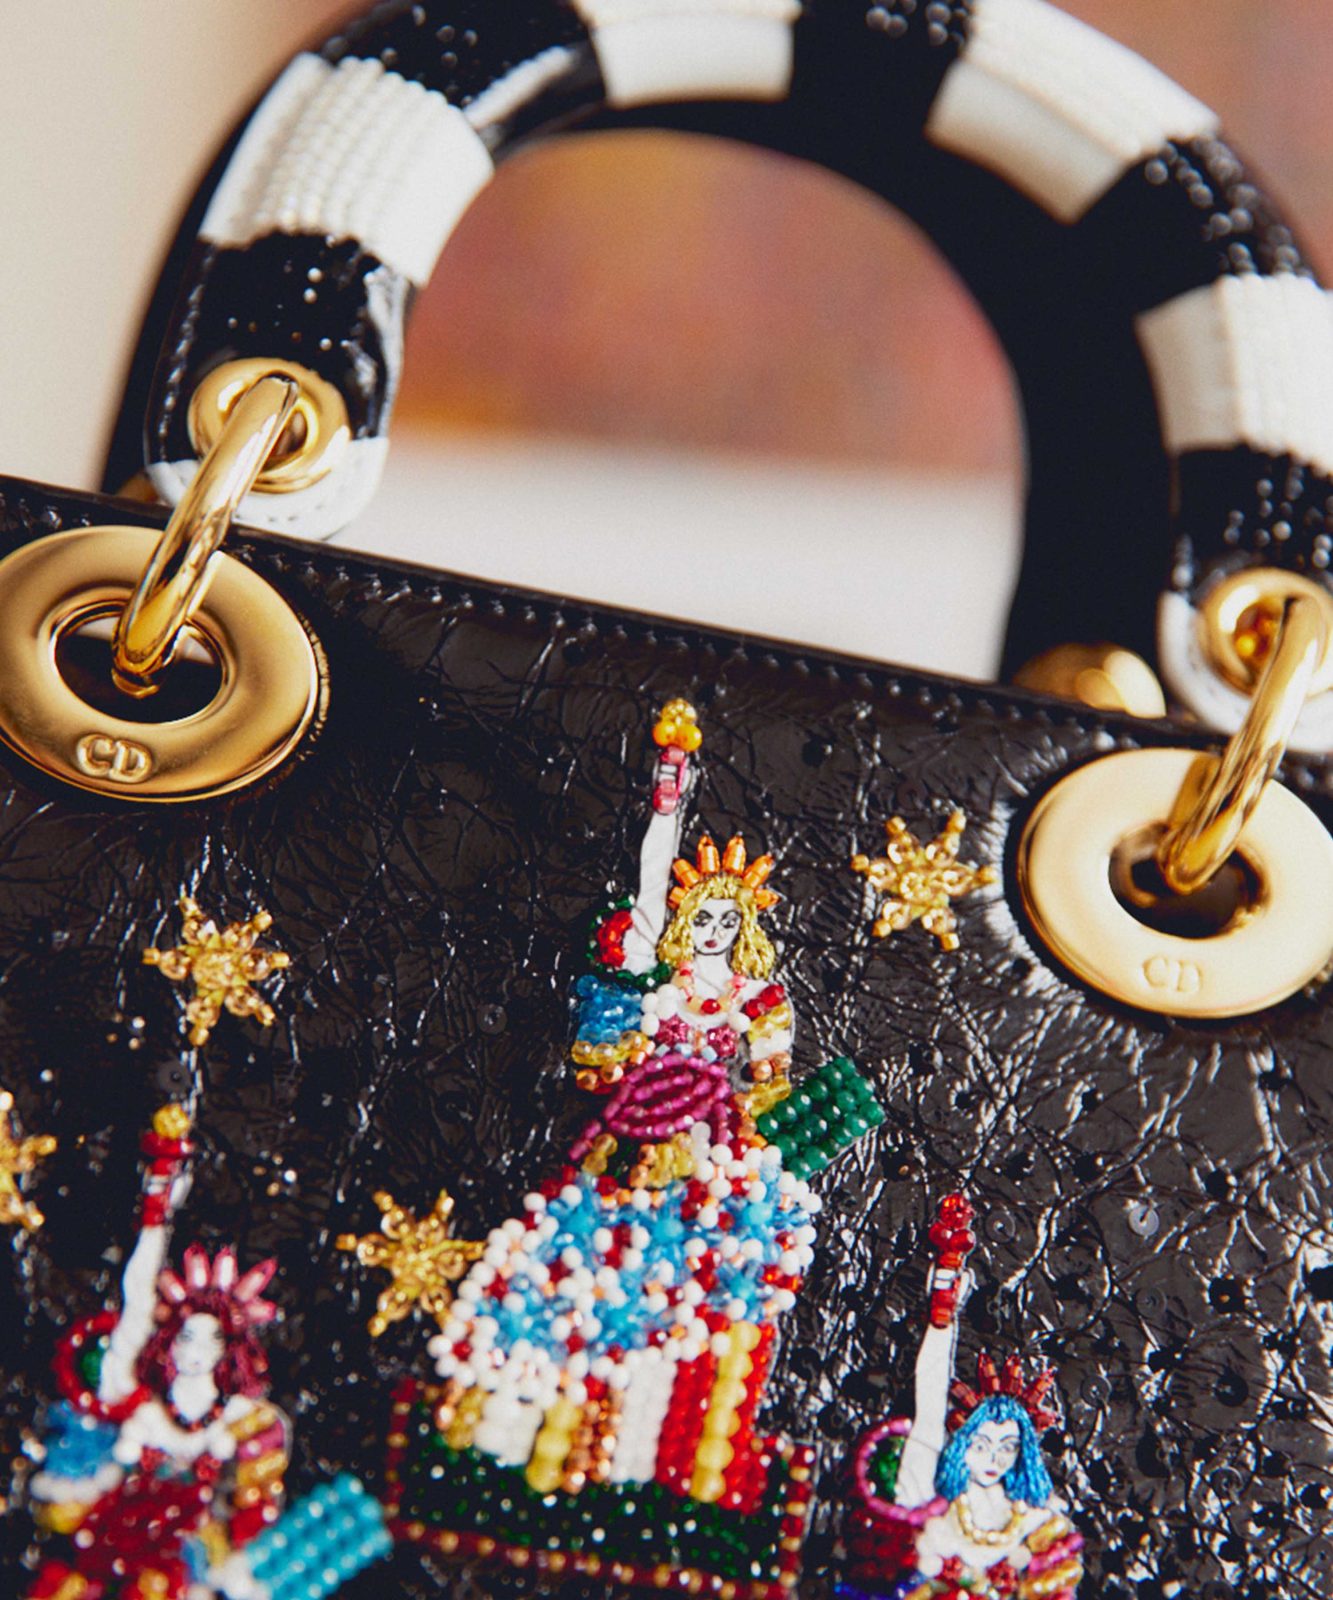 Lady Dior Art 10 new artists revisit the iconic Lady Dior bag